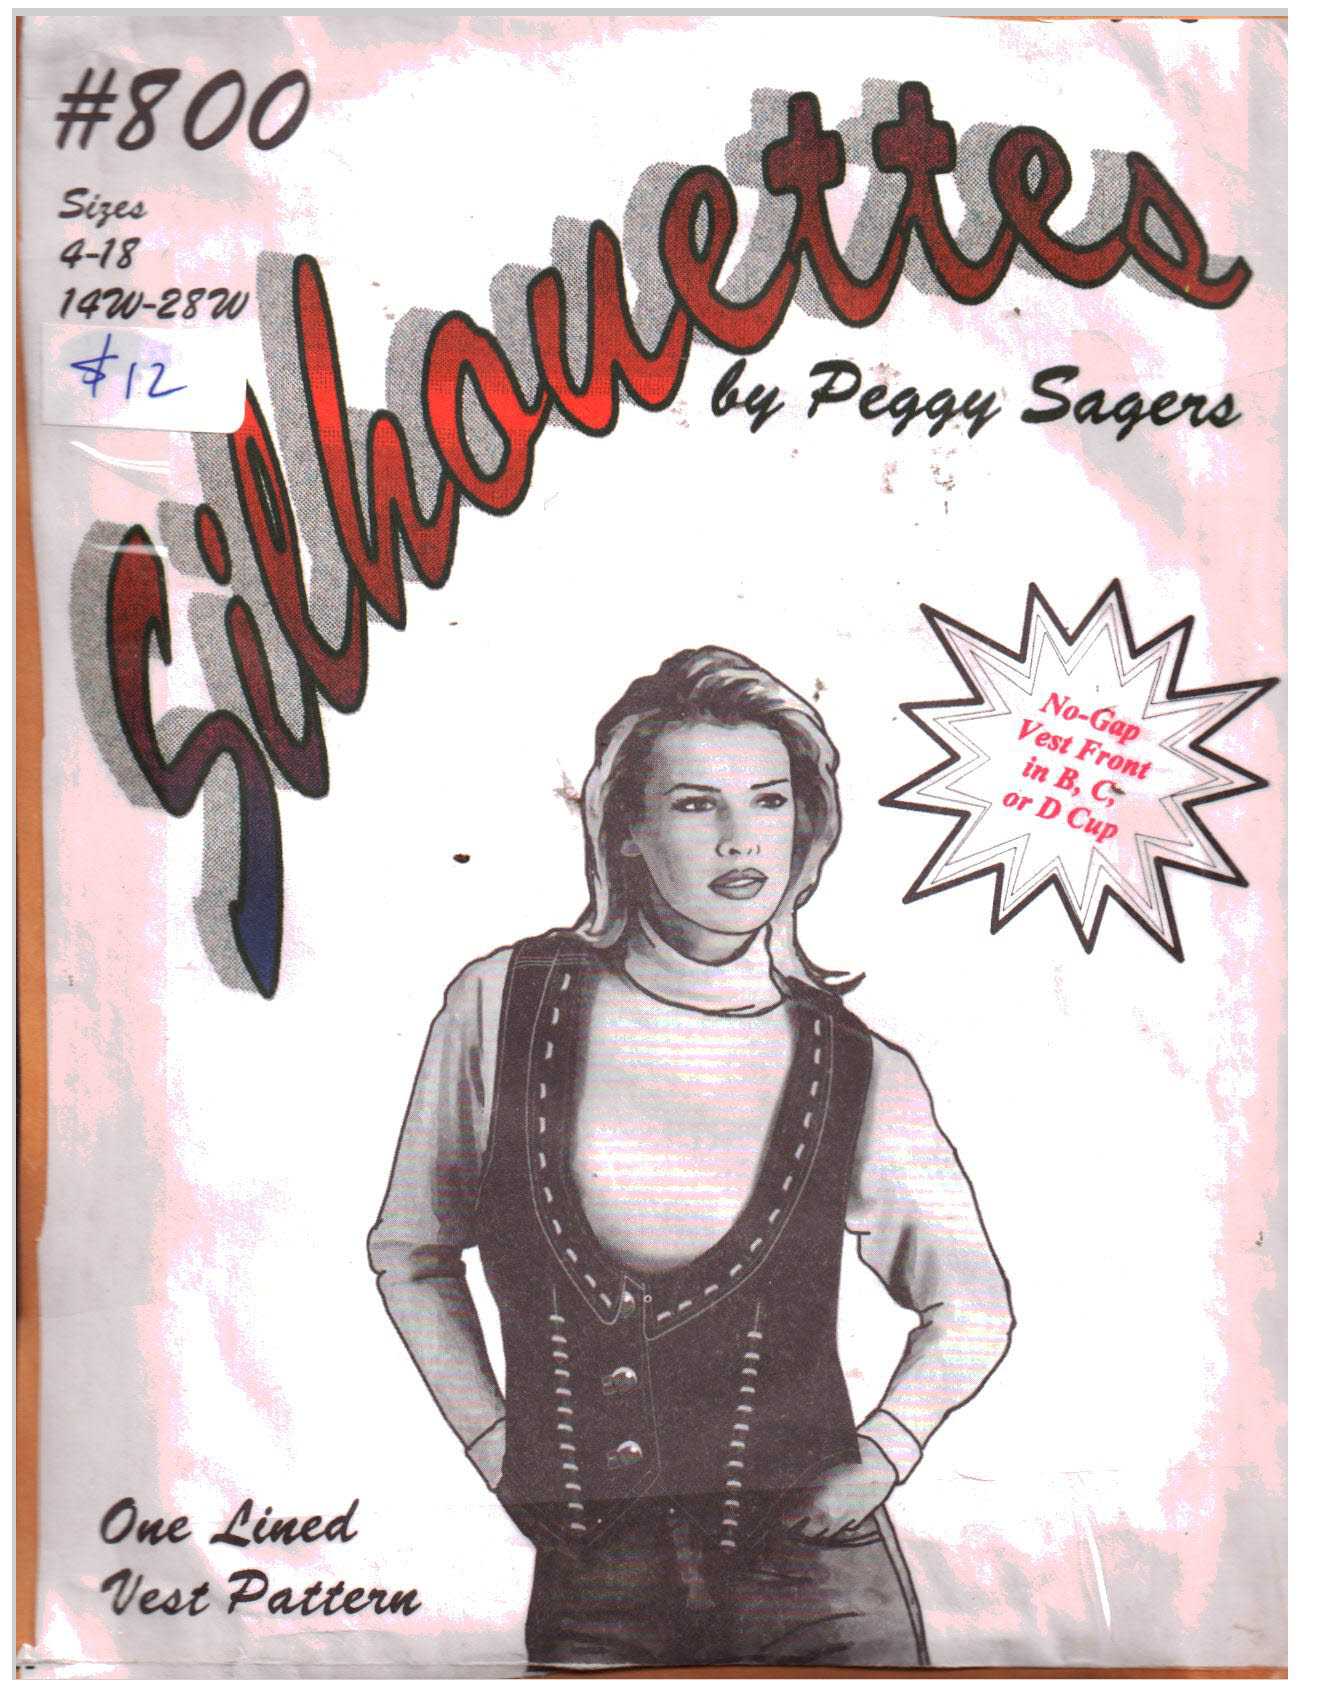 Silhouettes 800 Vest by Peggy Sagers Size: 4-18 Uncut Sewing Pattern